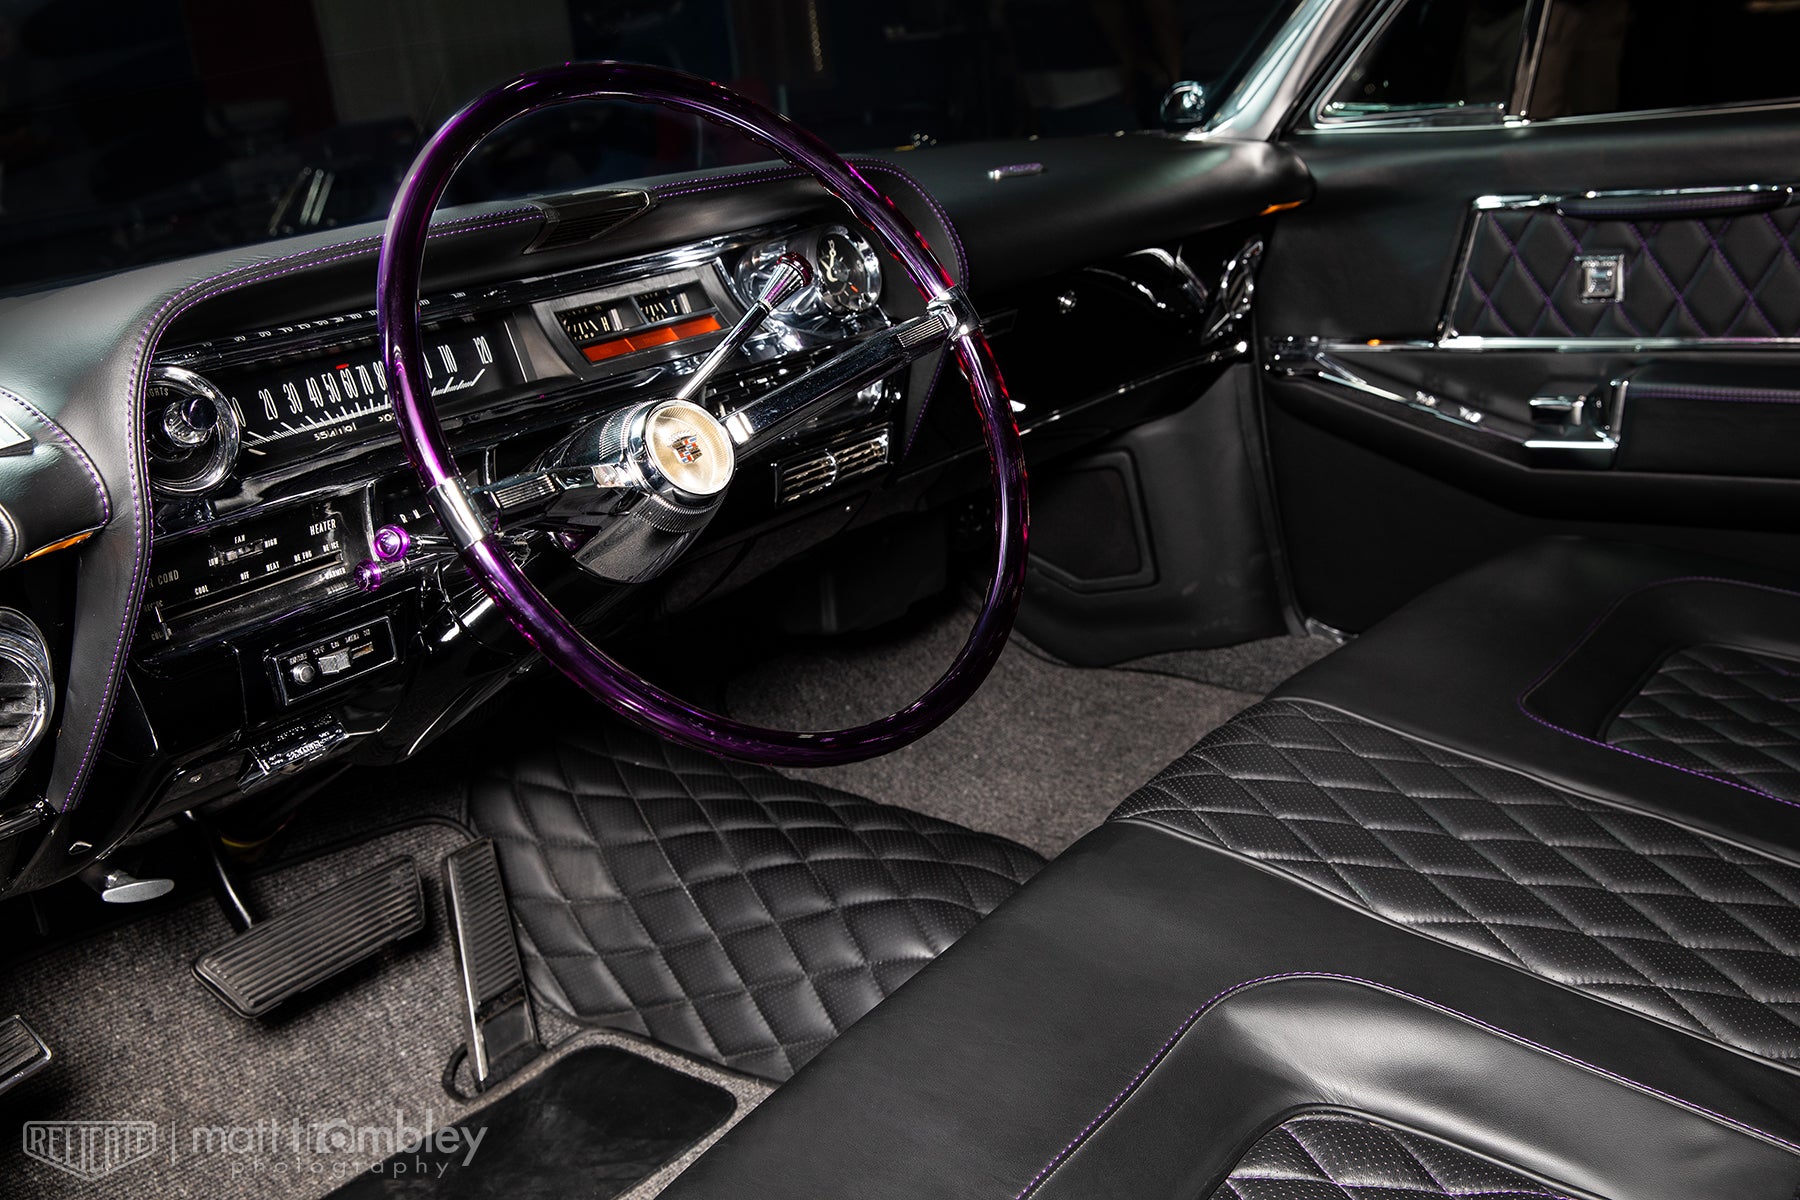 Relicate Leather Shine Speed Shop 1964 Cadillac Coupe "PsyCadellic" Leather Interior purple steering wheel